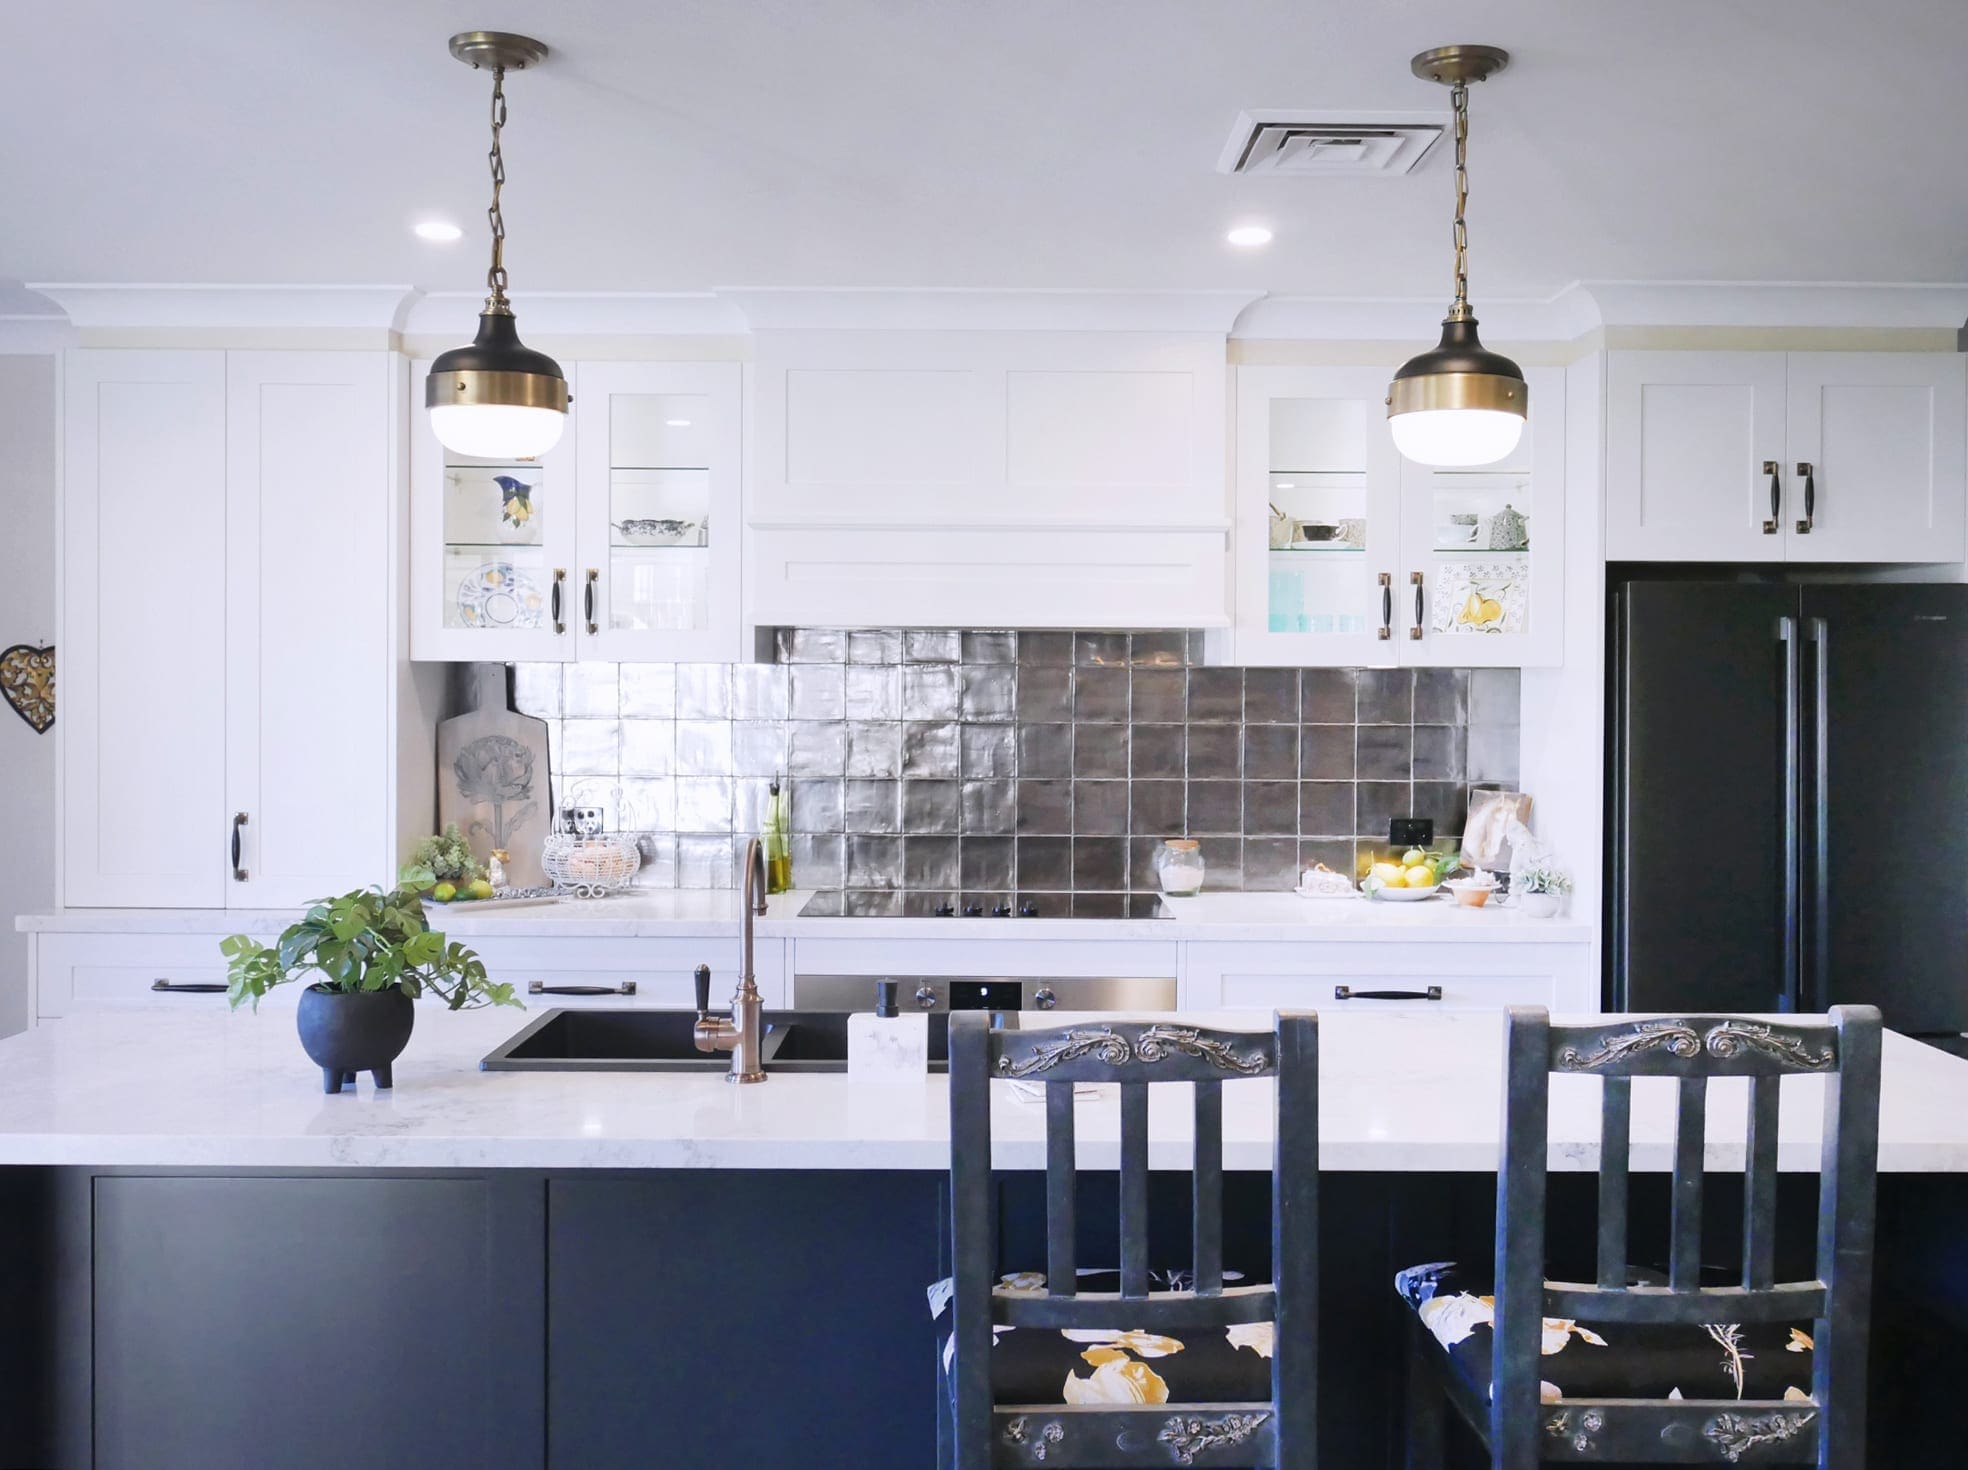 Dramatic two tones kitchen Bowral with two handing light pendants over the kitchen island